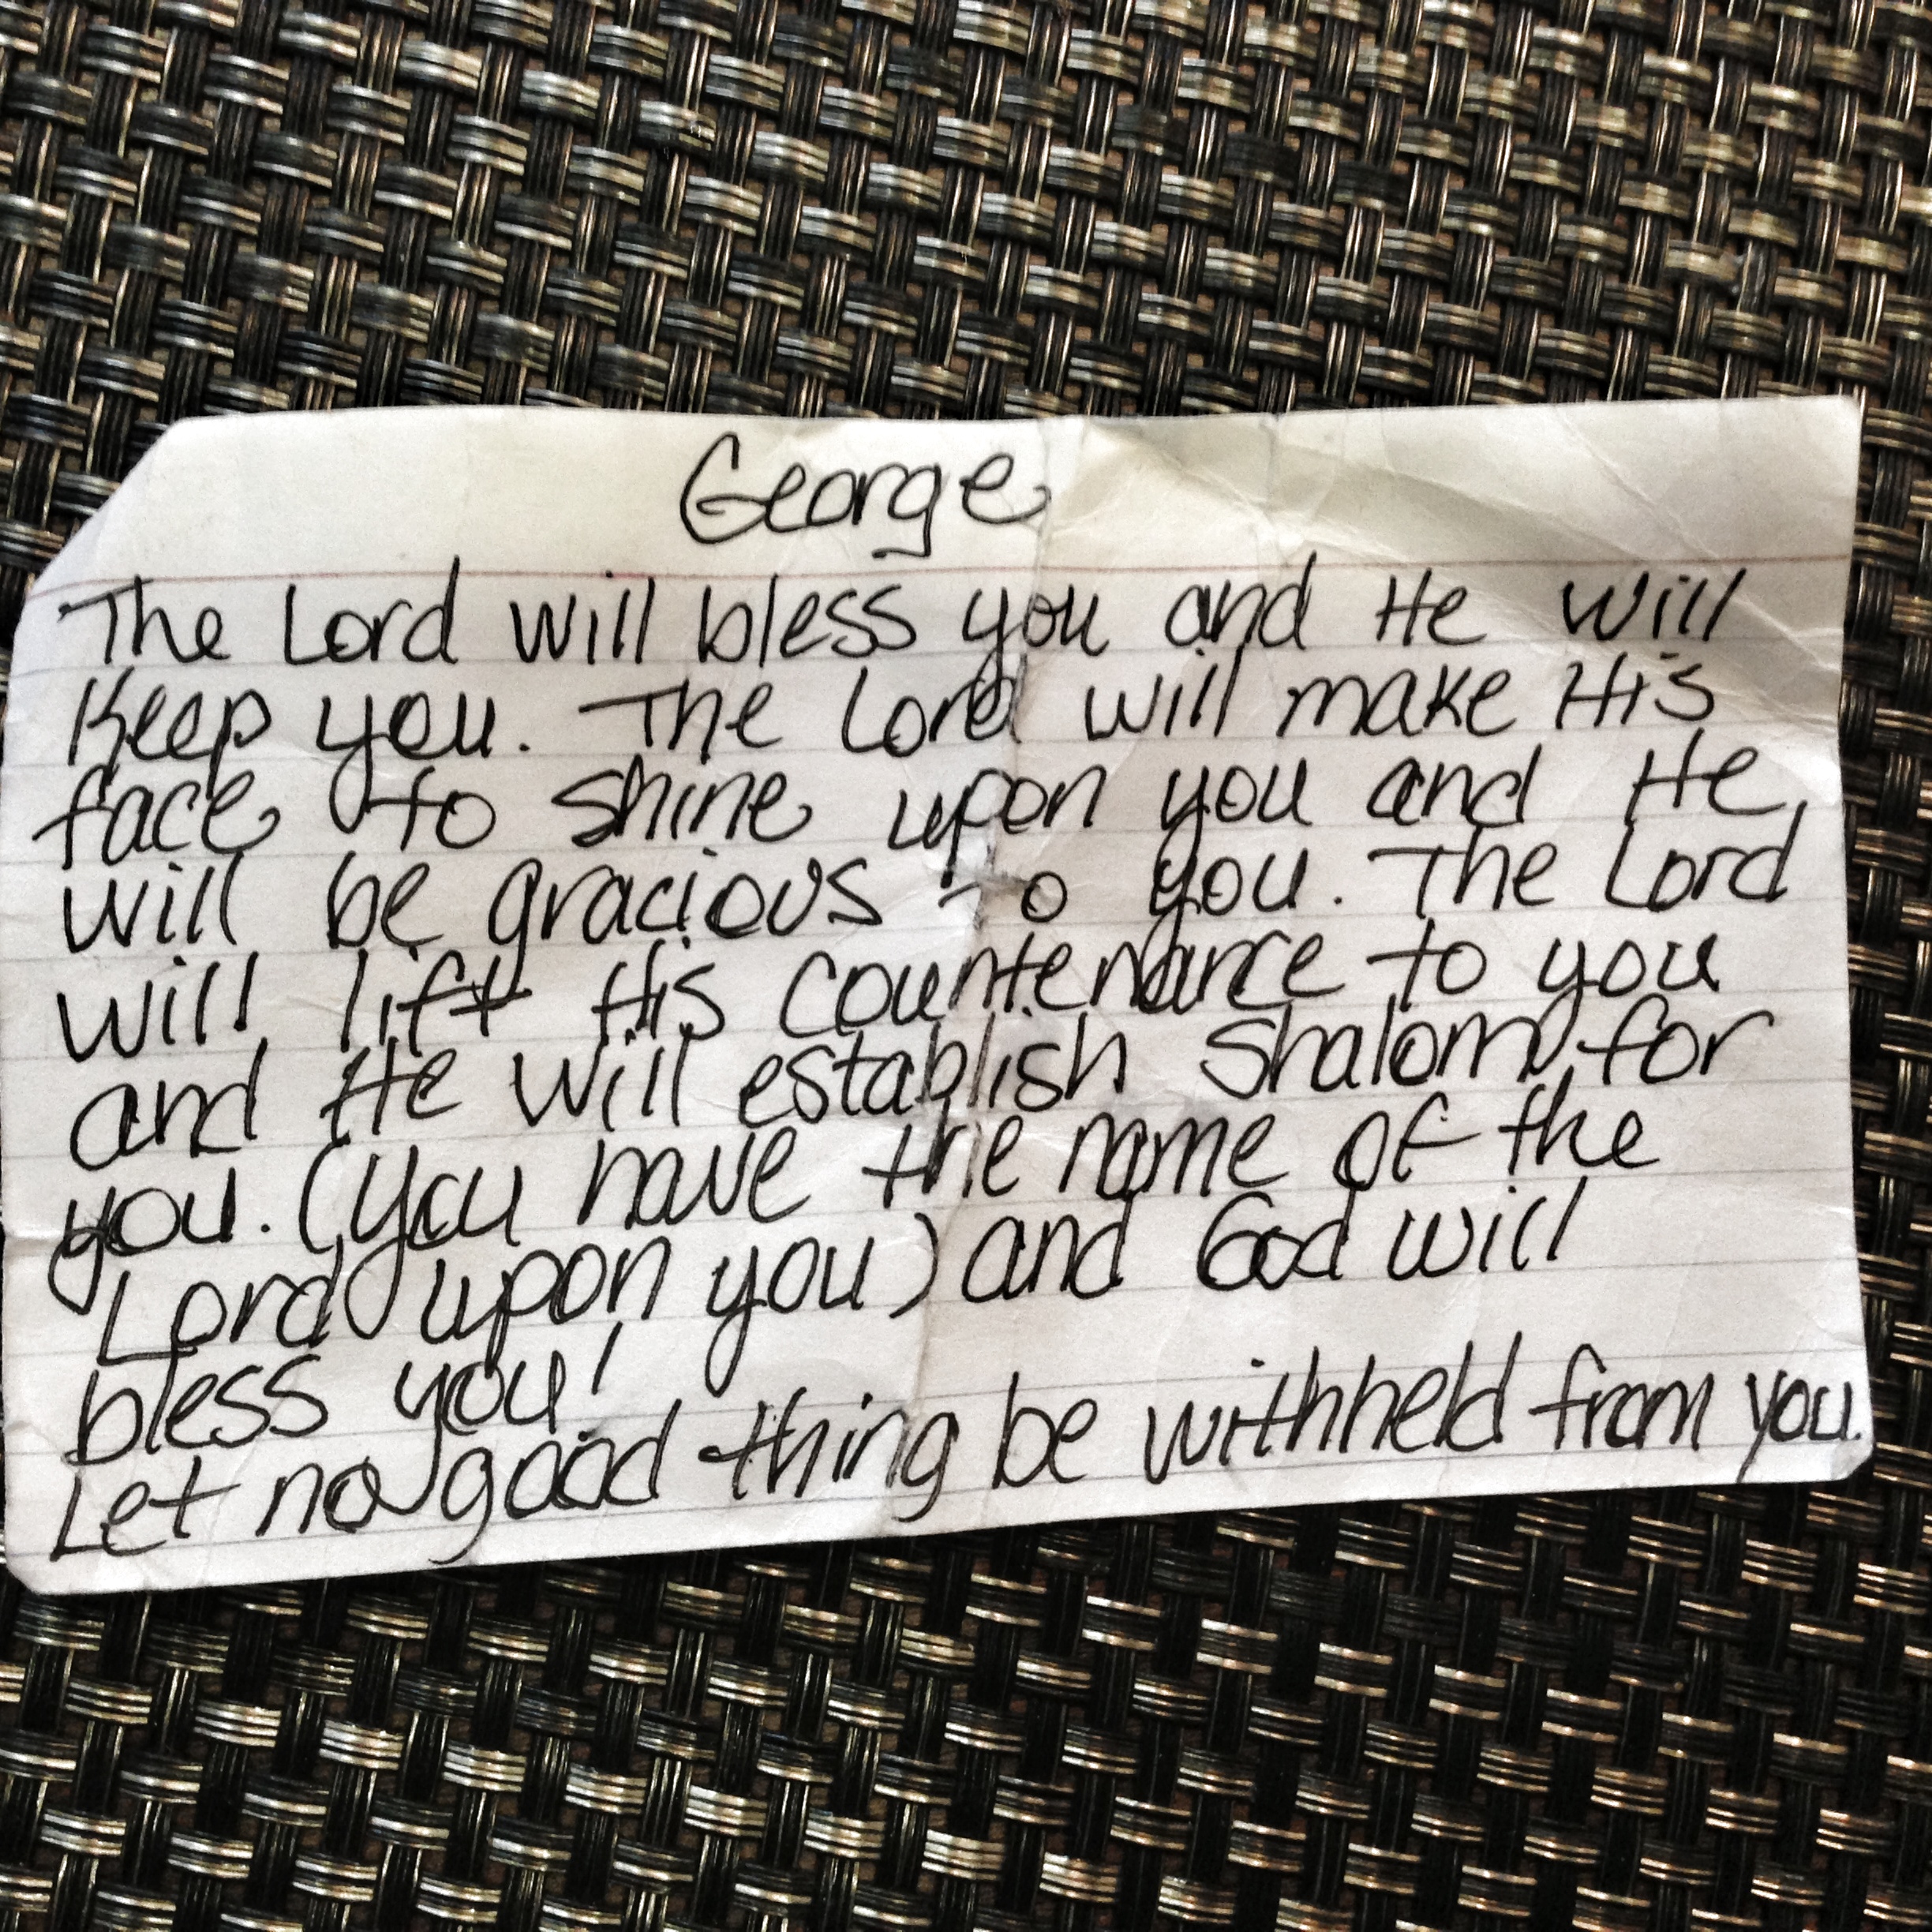 a note card found on the floor at the airport